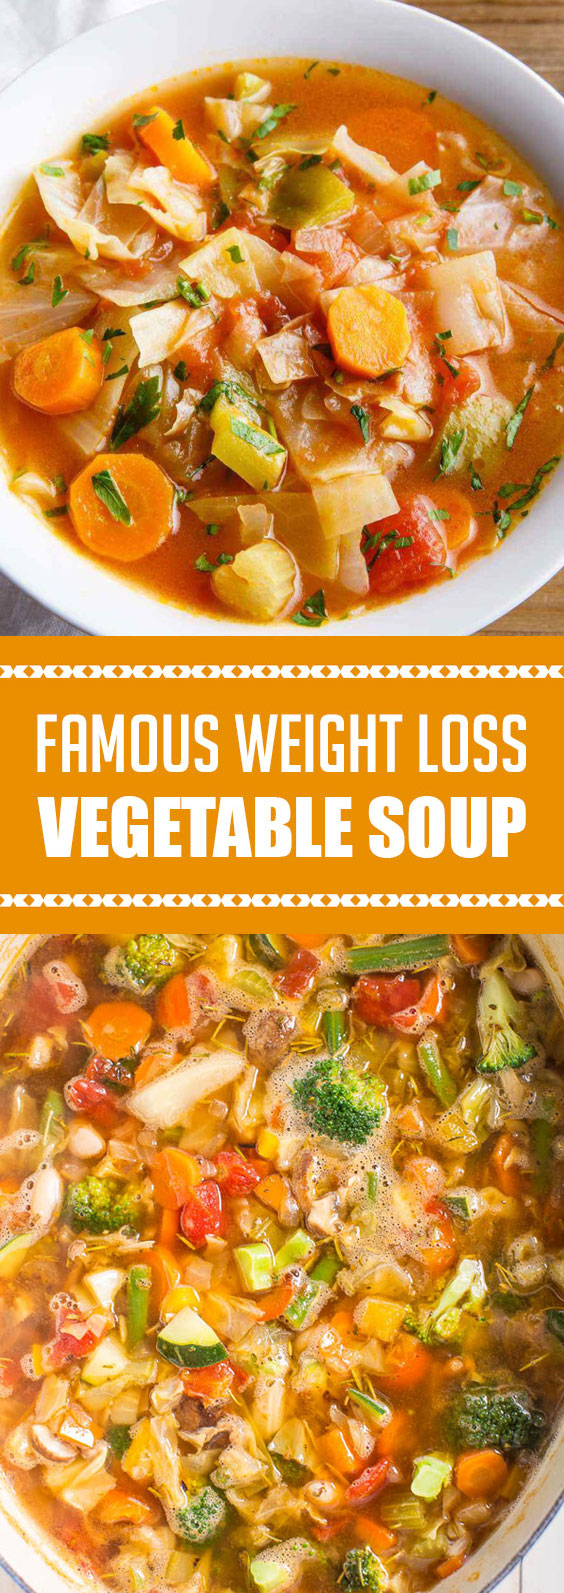 Famous Instant Pot Weight Loss Soup - FOOD RECIPES